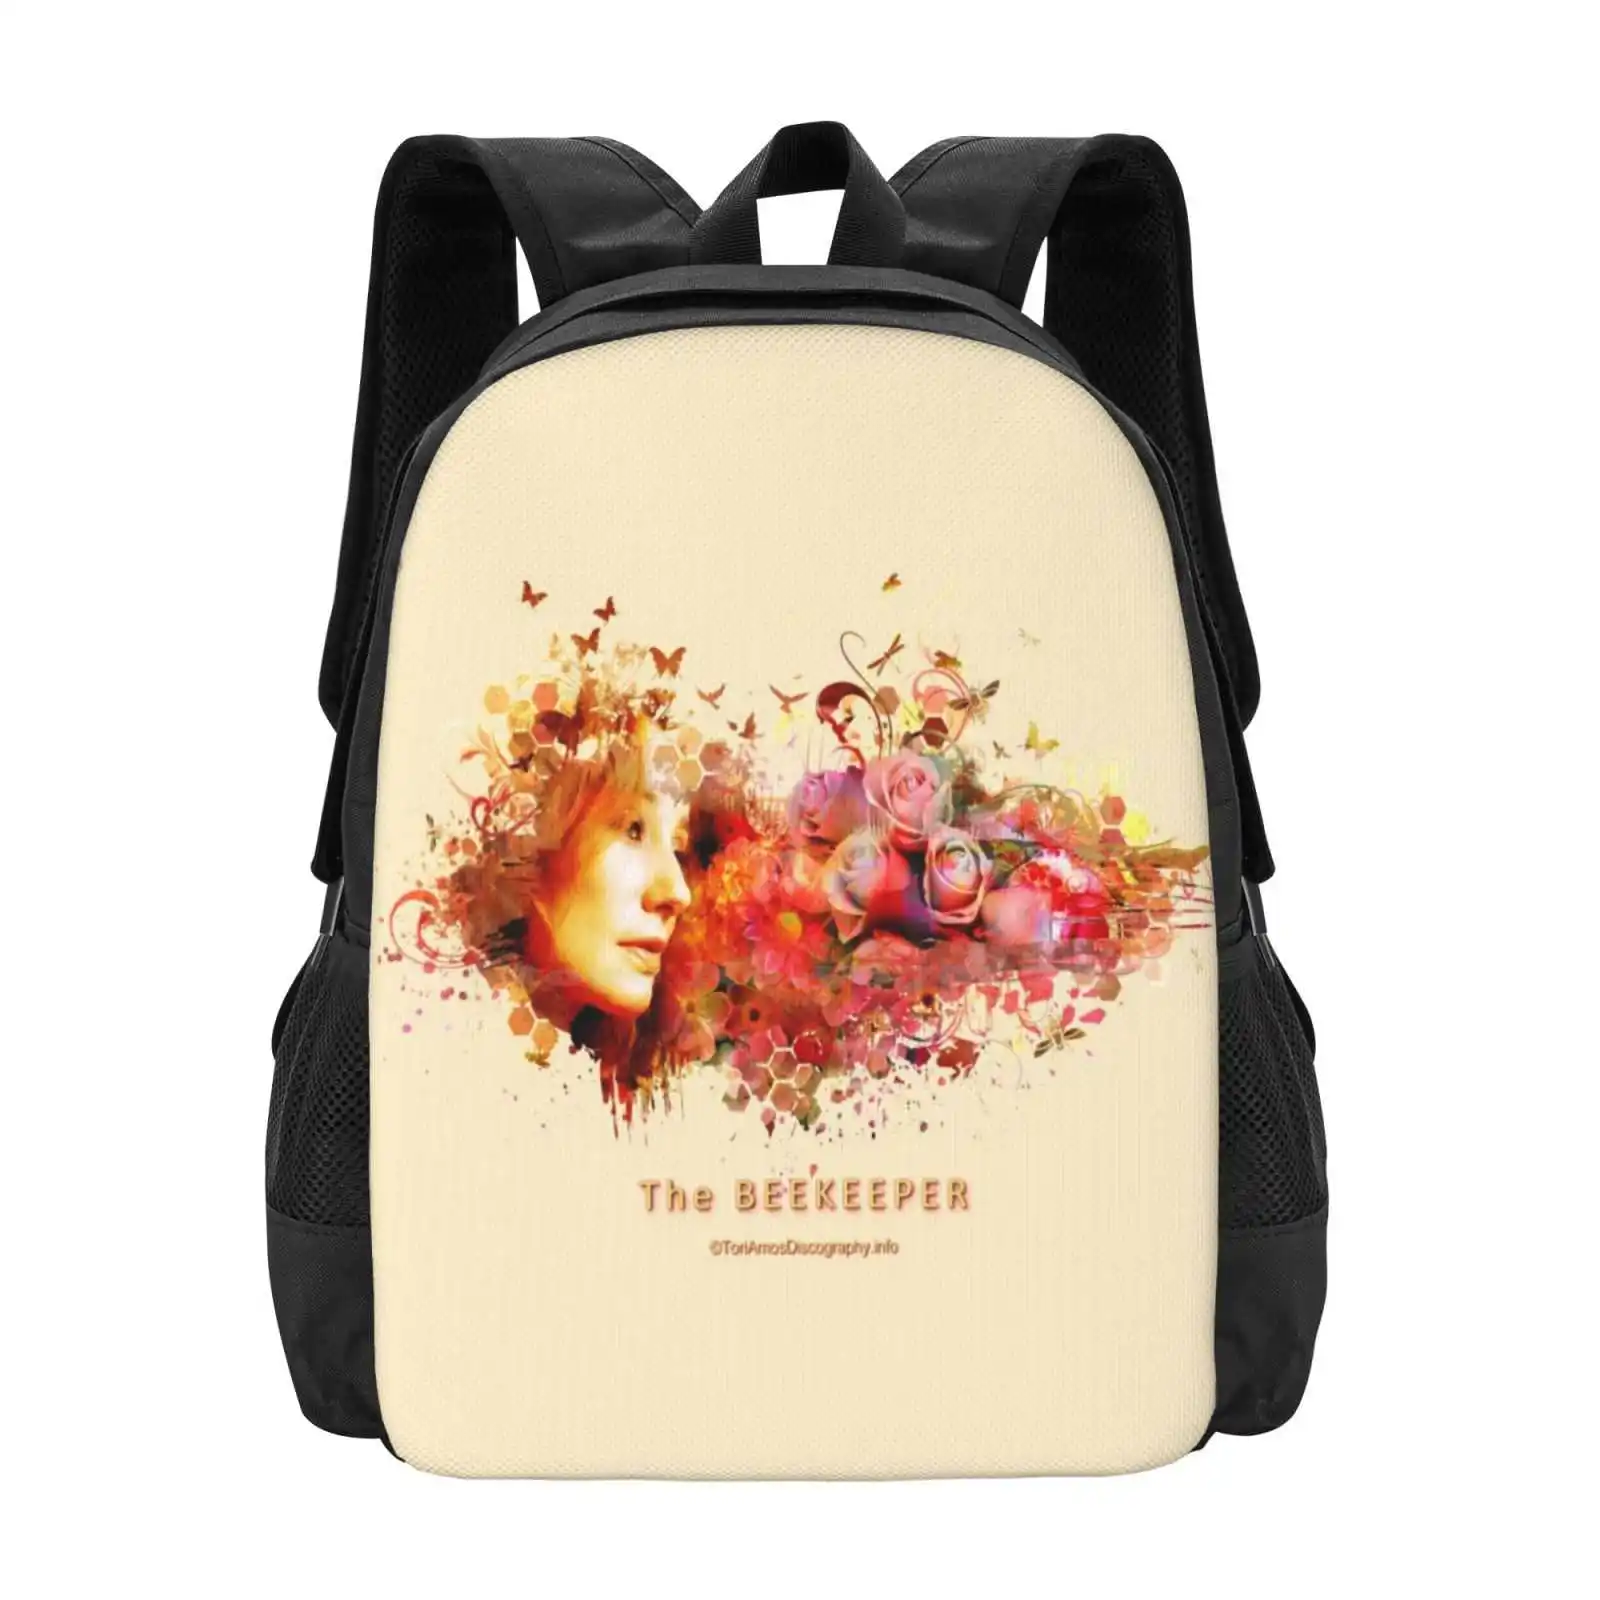 

The Beekeeper Design From Toriamosdiscography.Info School Bags Travel Laptop Backpack Tori Amos Discography Ears With Feet The